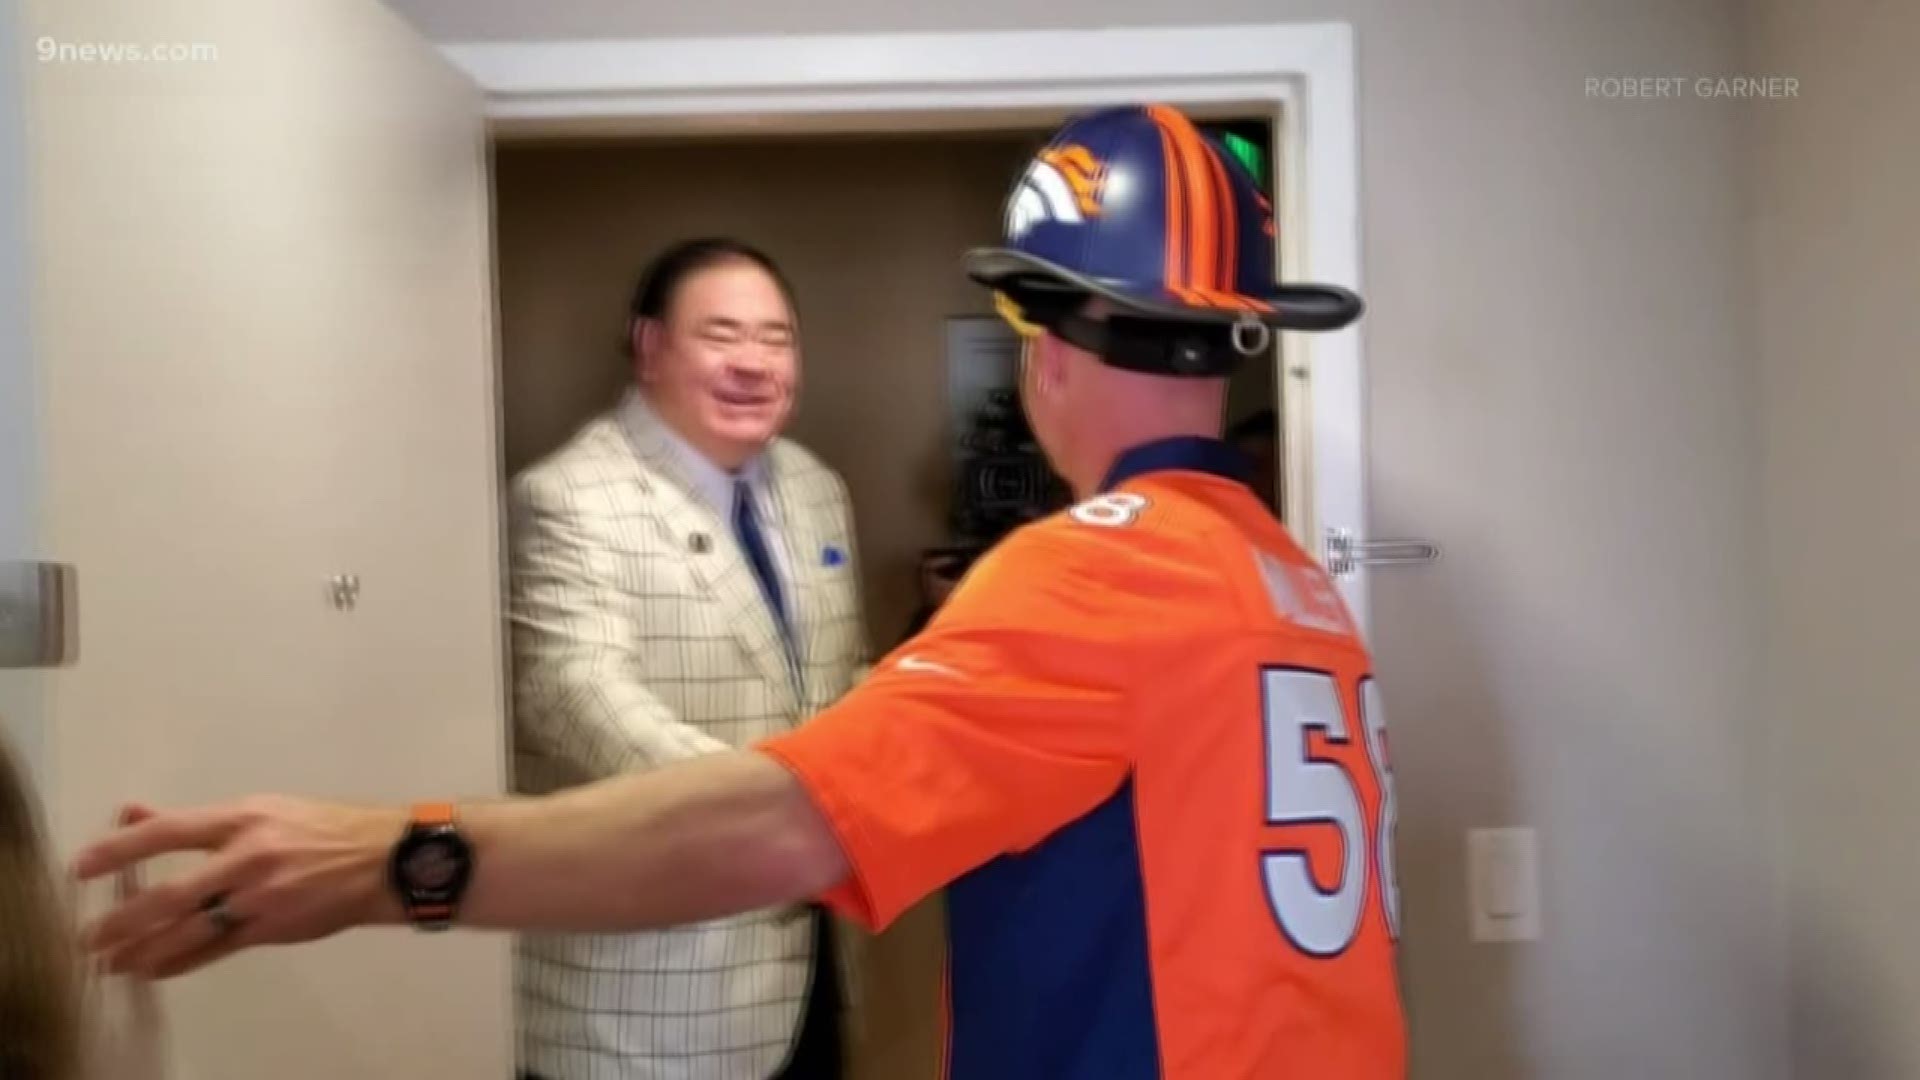 Broncos superfan Rescue Rob is being recognized for his love of football.